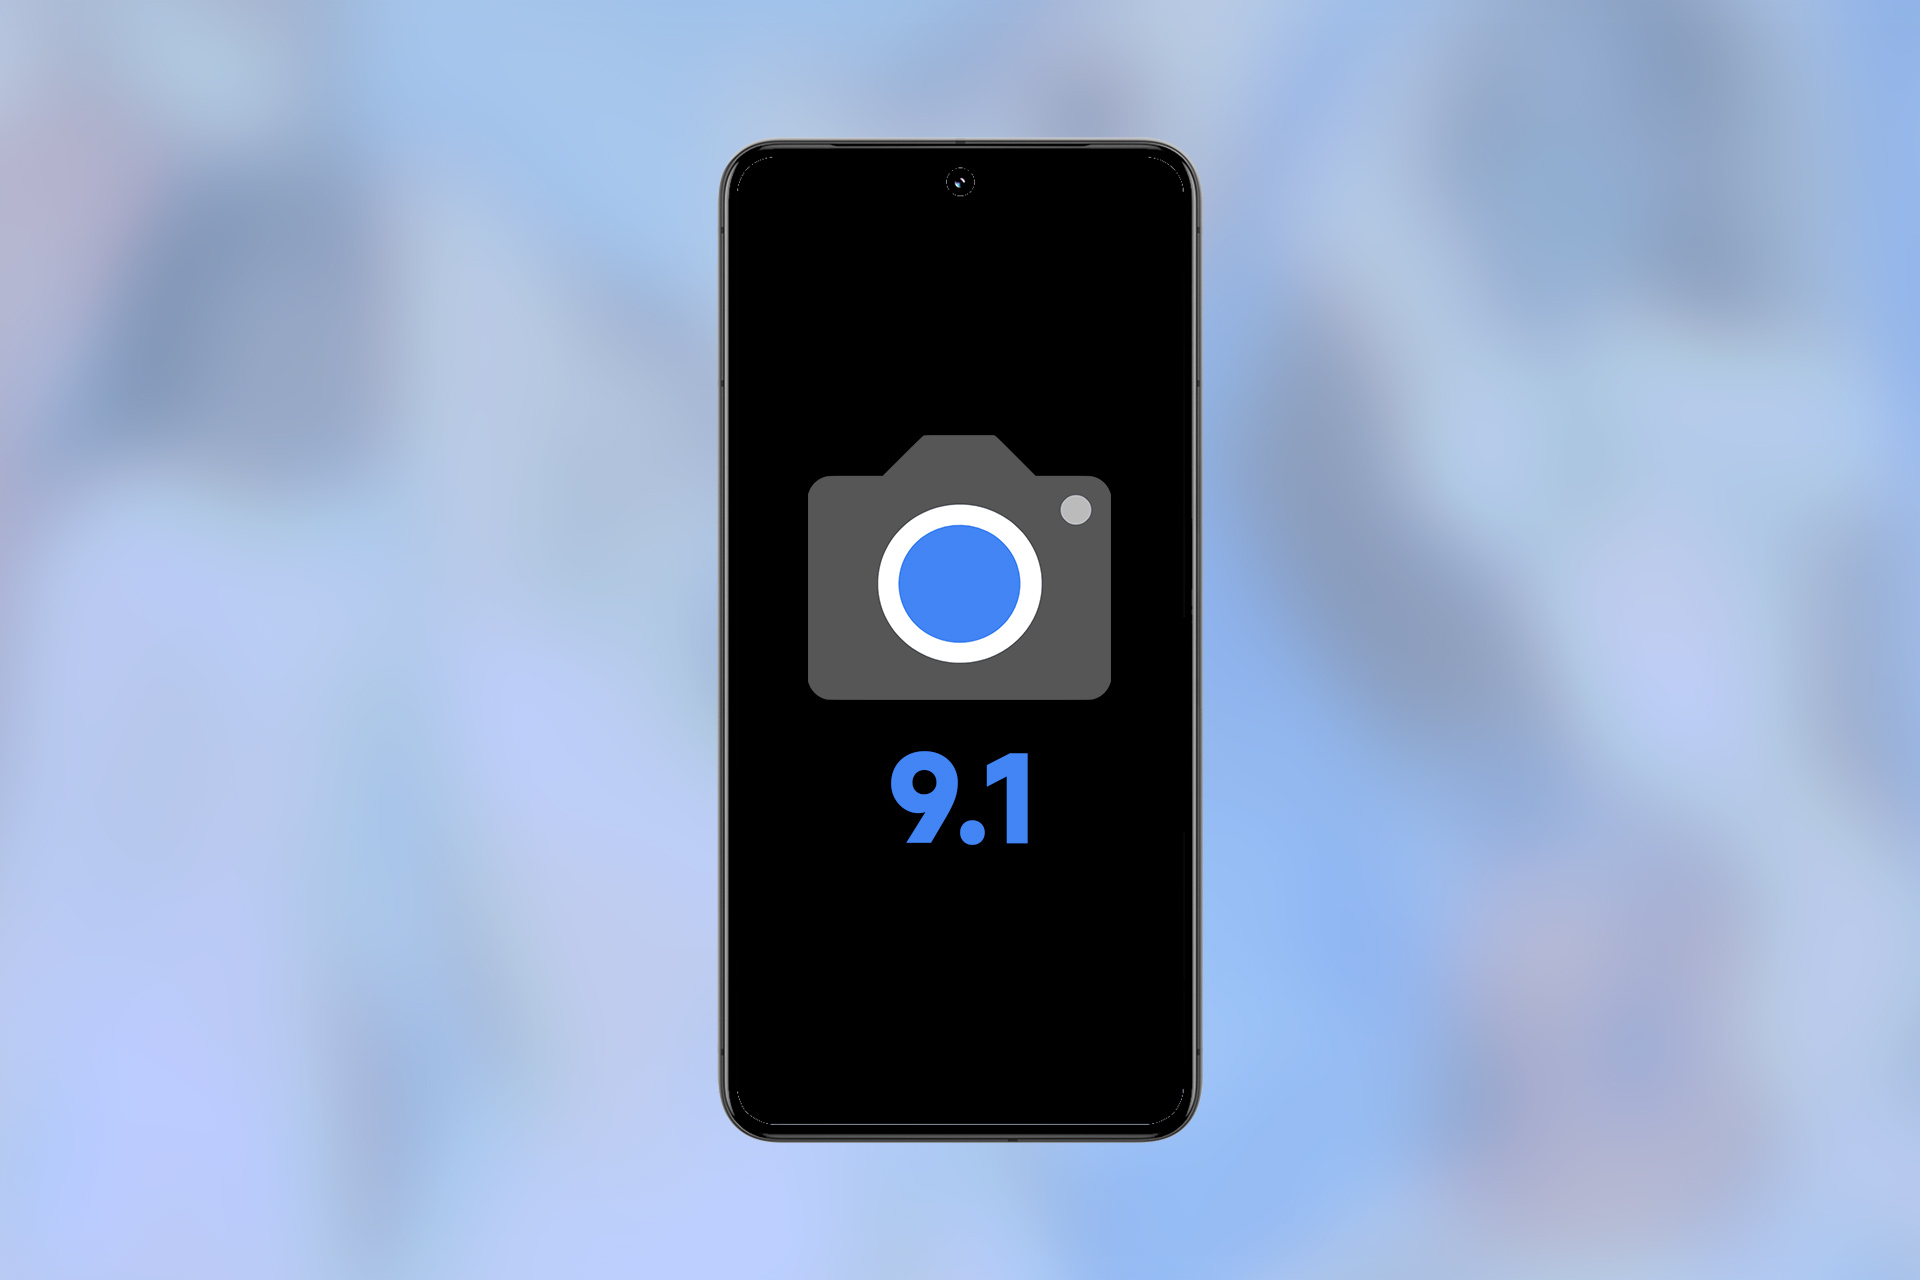 Is GCam Port ending with Google Camera 9.1?